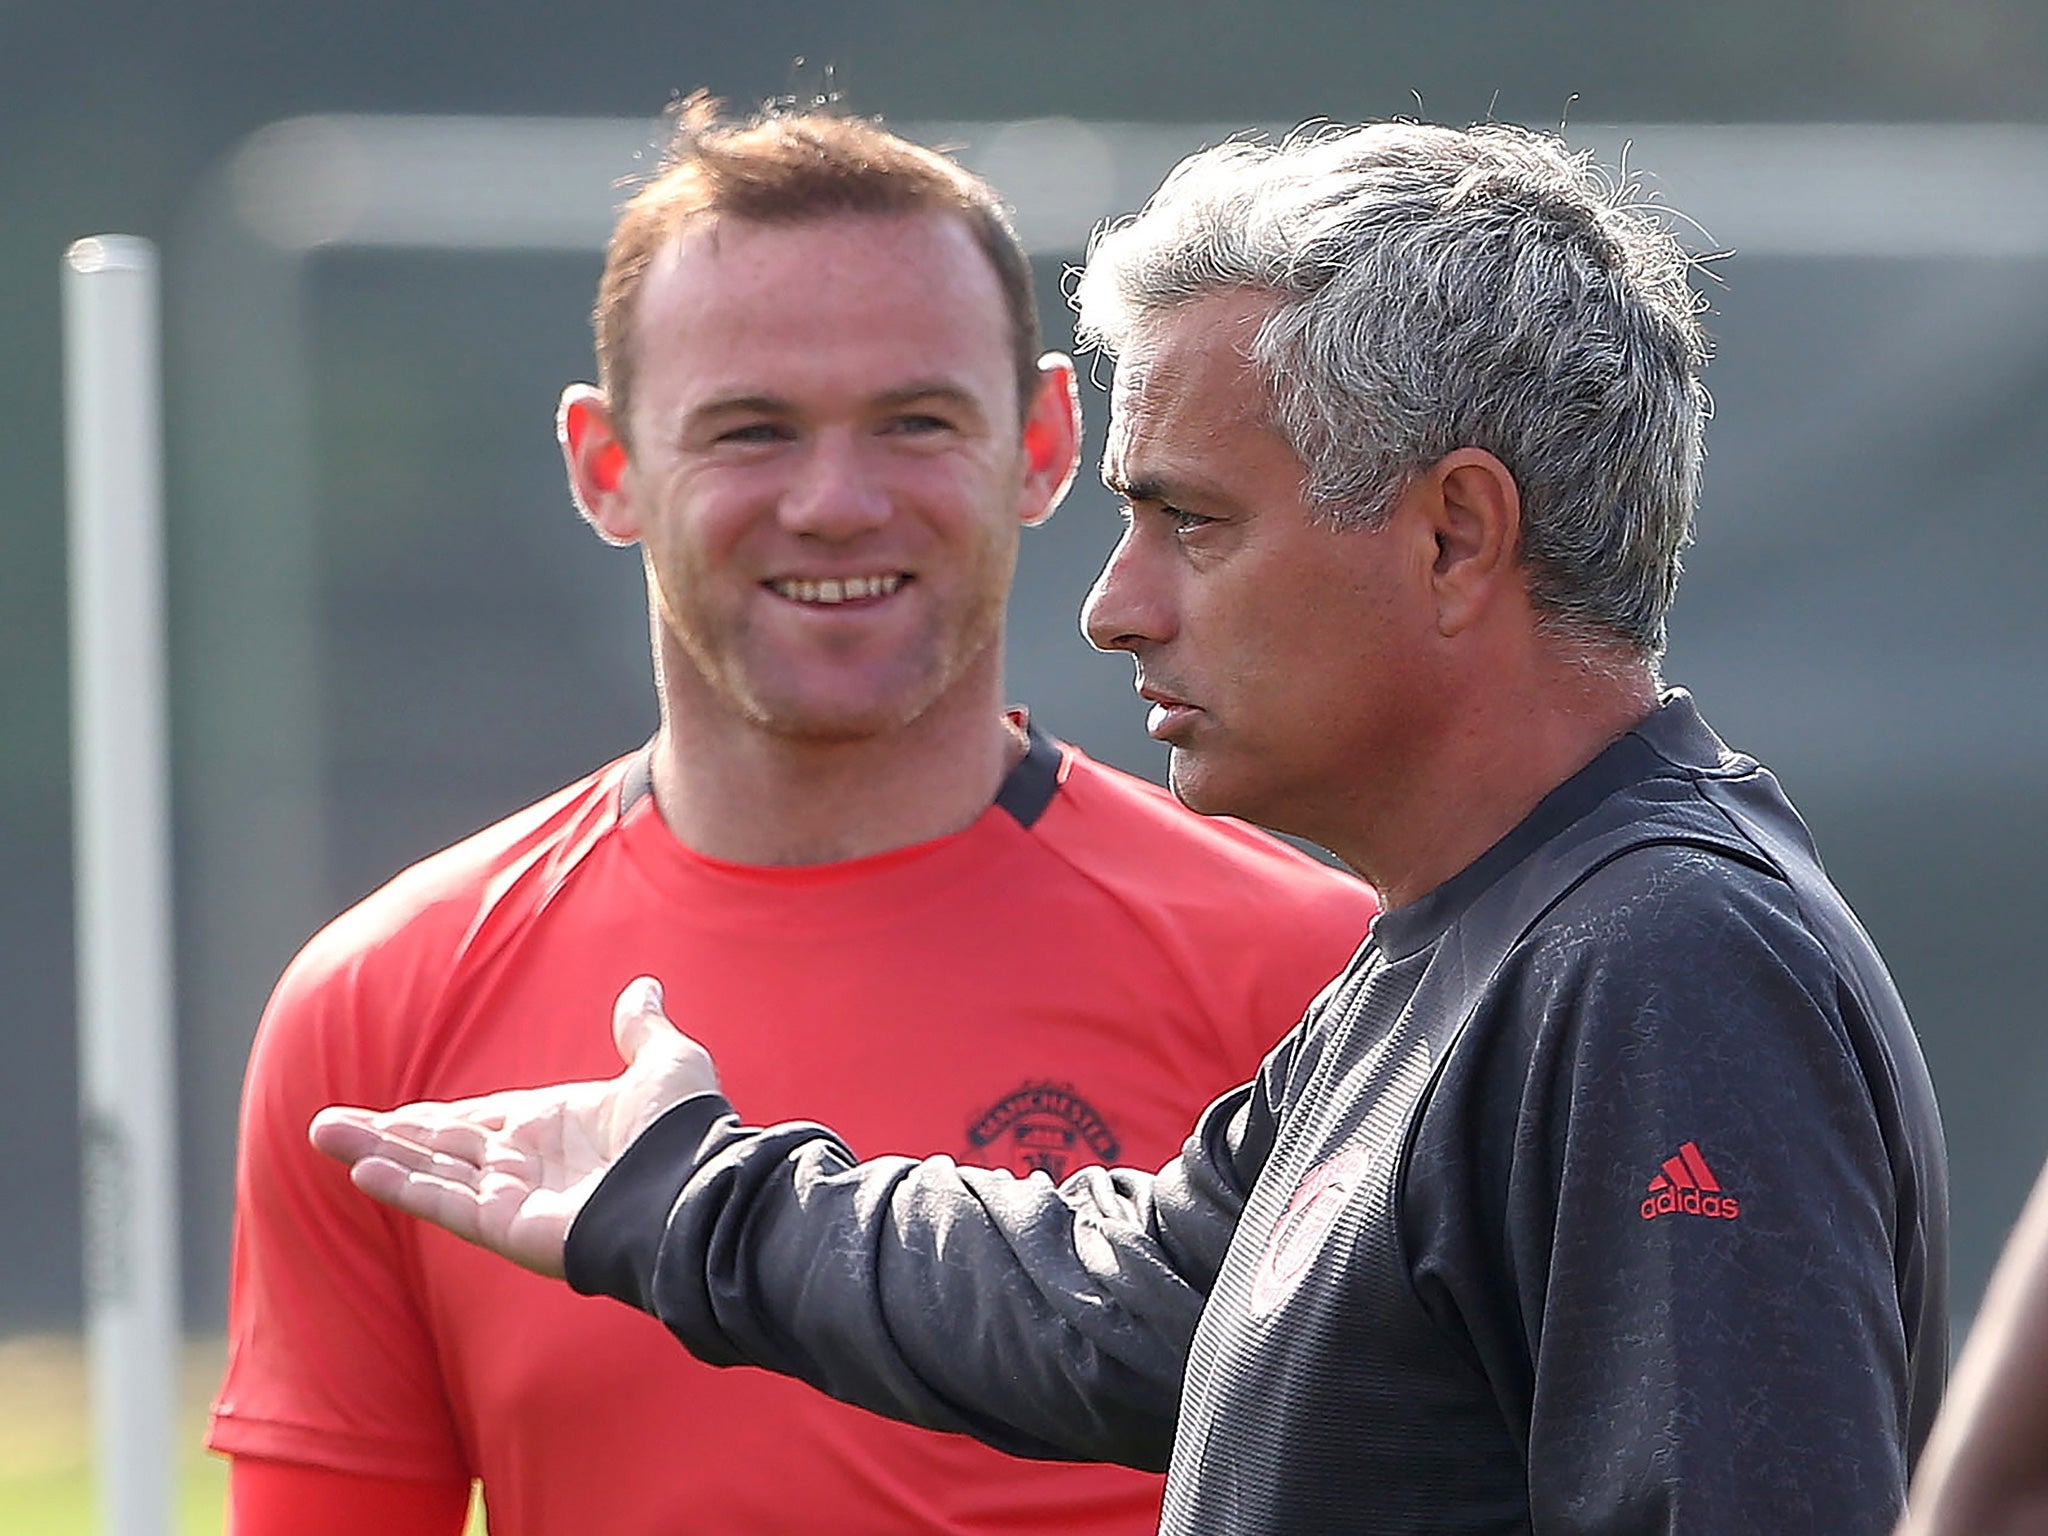 Rooney has been dropped from United's starting line-up by Mourinho